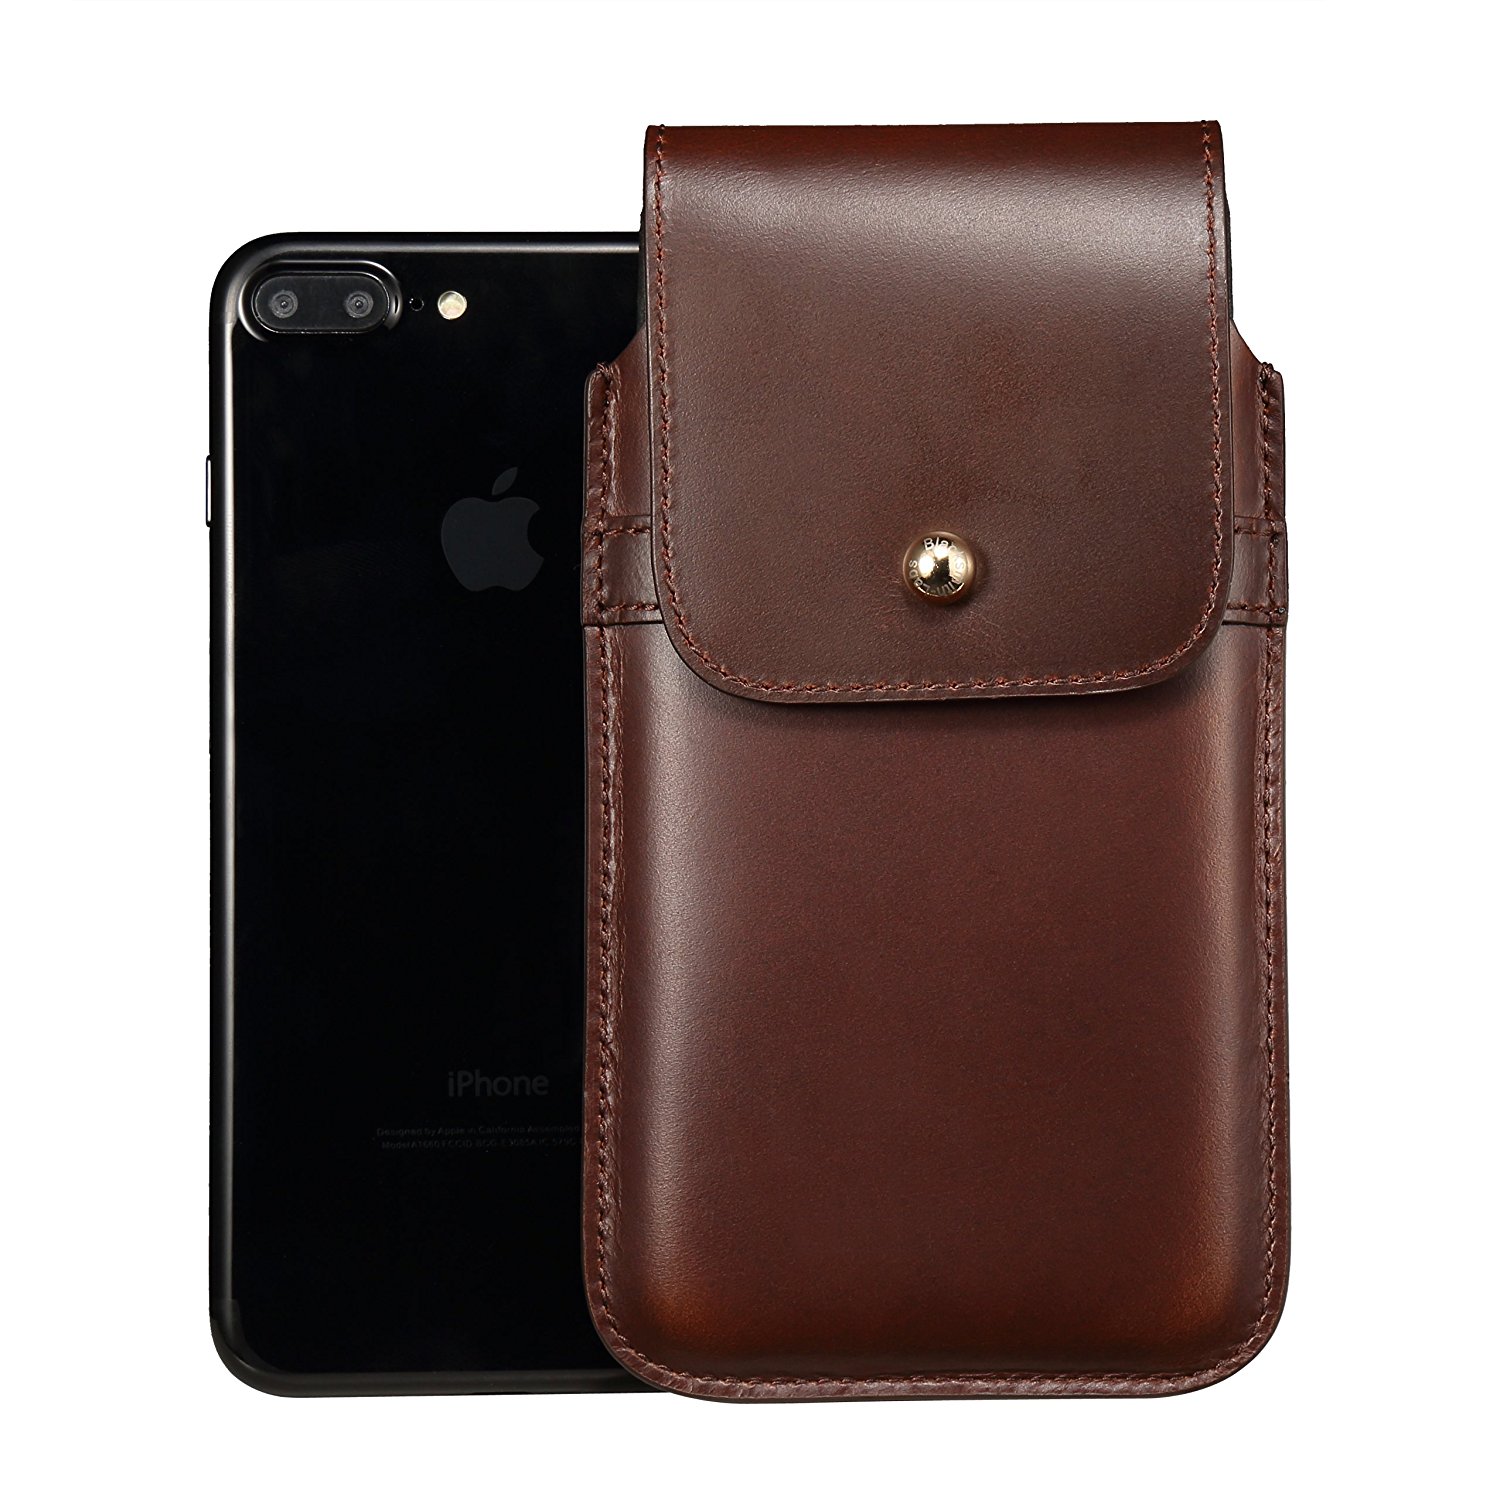 Blacksmith-Labs Holster Case for iPhone 6 Plus; iPhone 6s Plus, iPhone 7 Plus - Brown